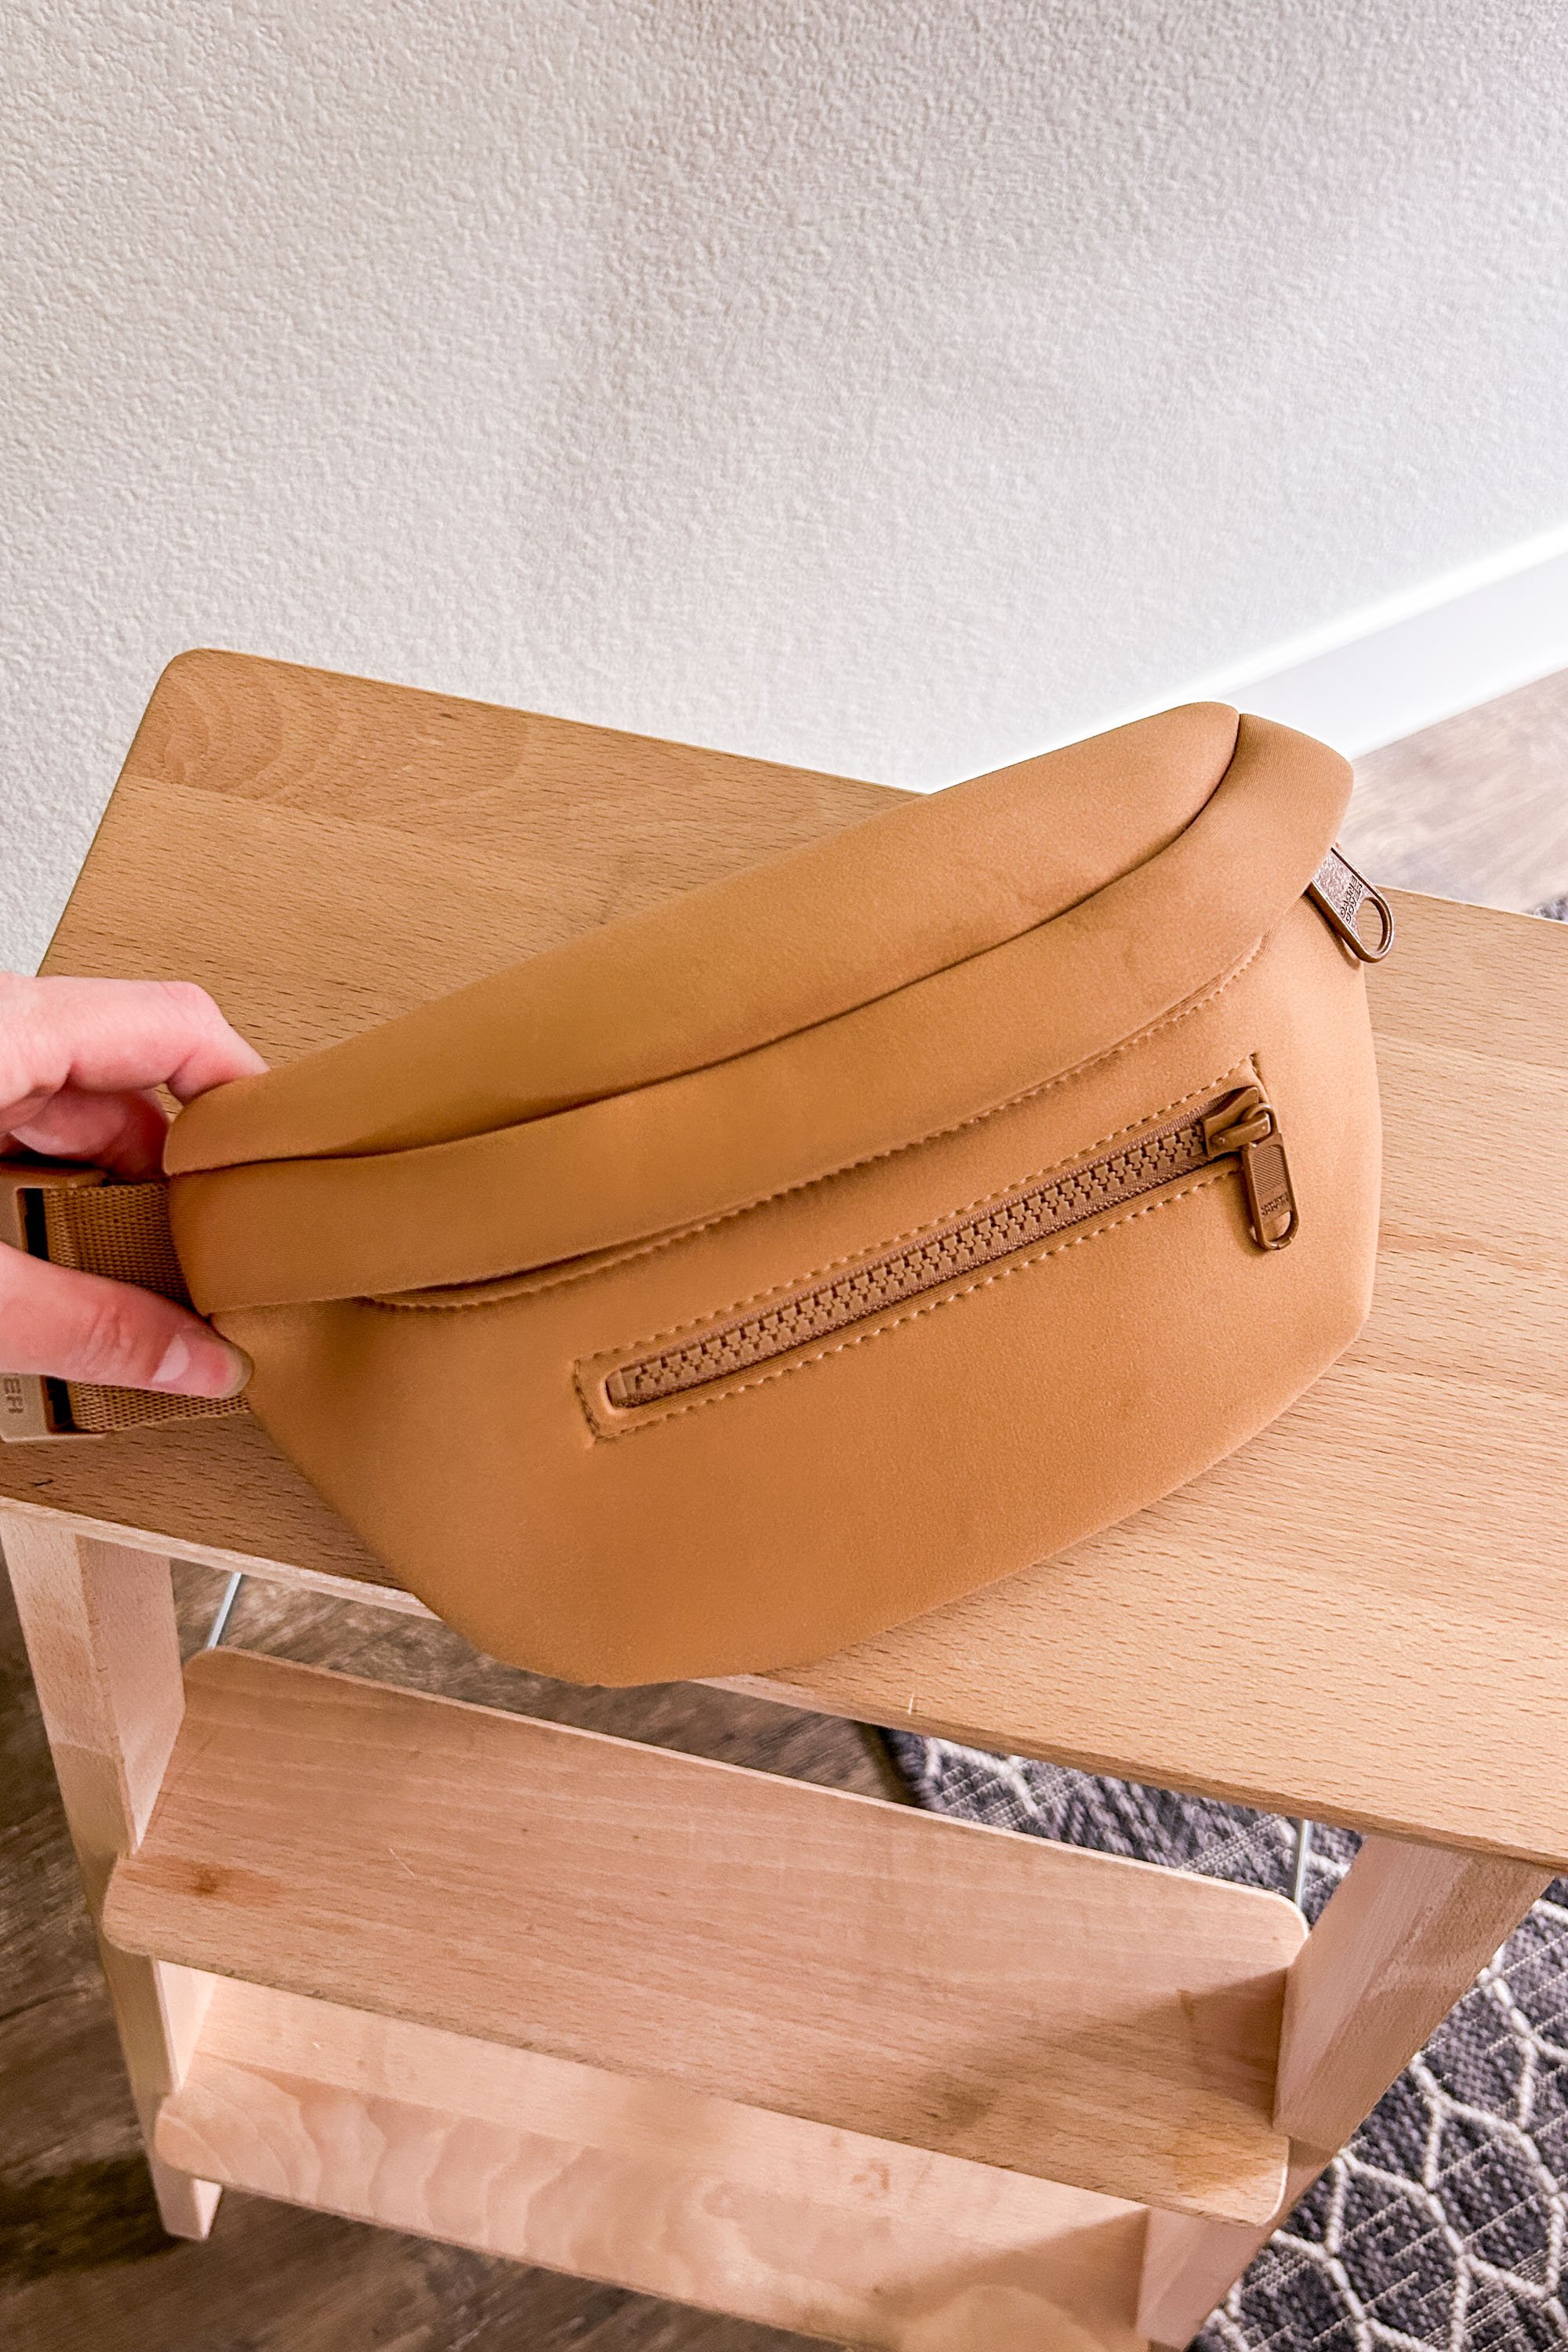 Dagne Dover - The Medium Landon Carryall fits most 13” laptops, so you can  carry your work and gym essentials, all in one bag.